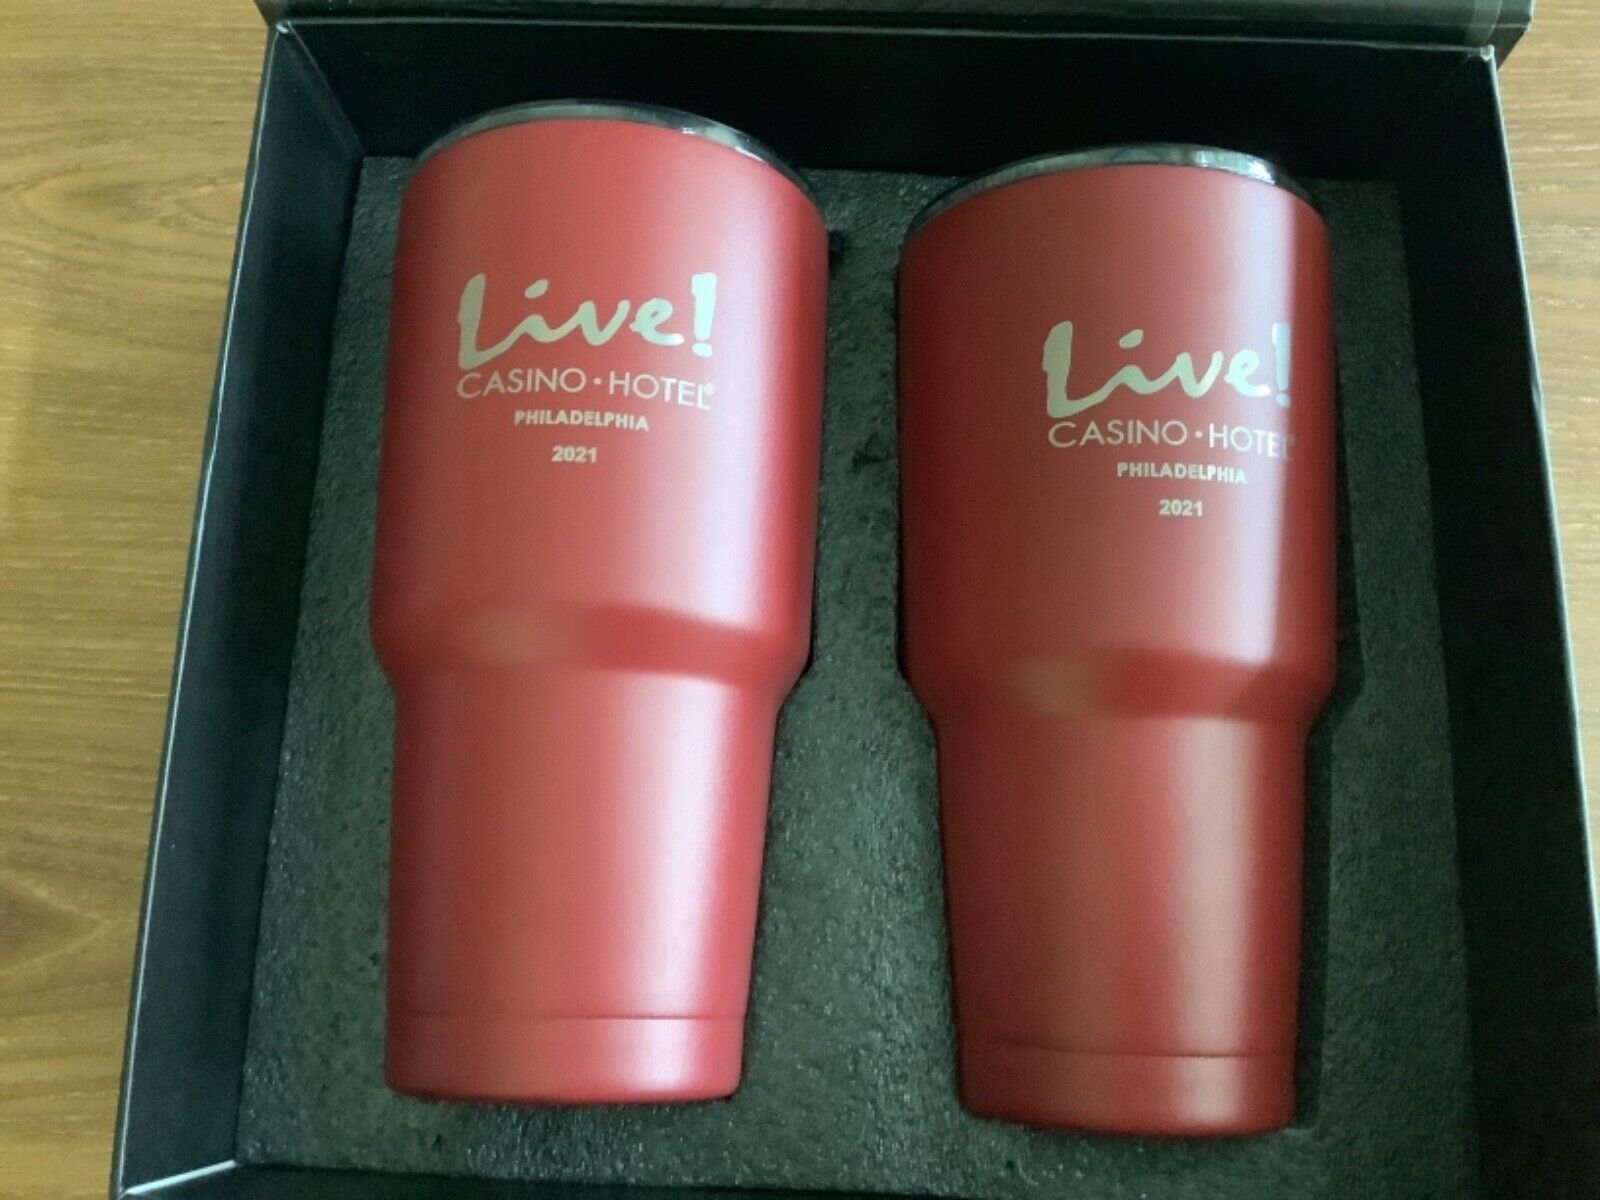 Live Casino In Philadelphia Limited Edition Promotional Stainless Steel Mugs Nib